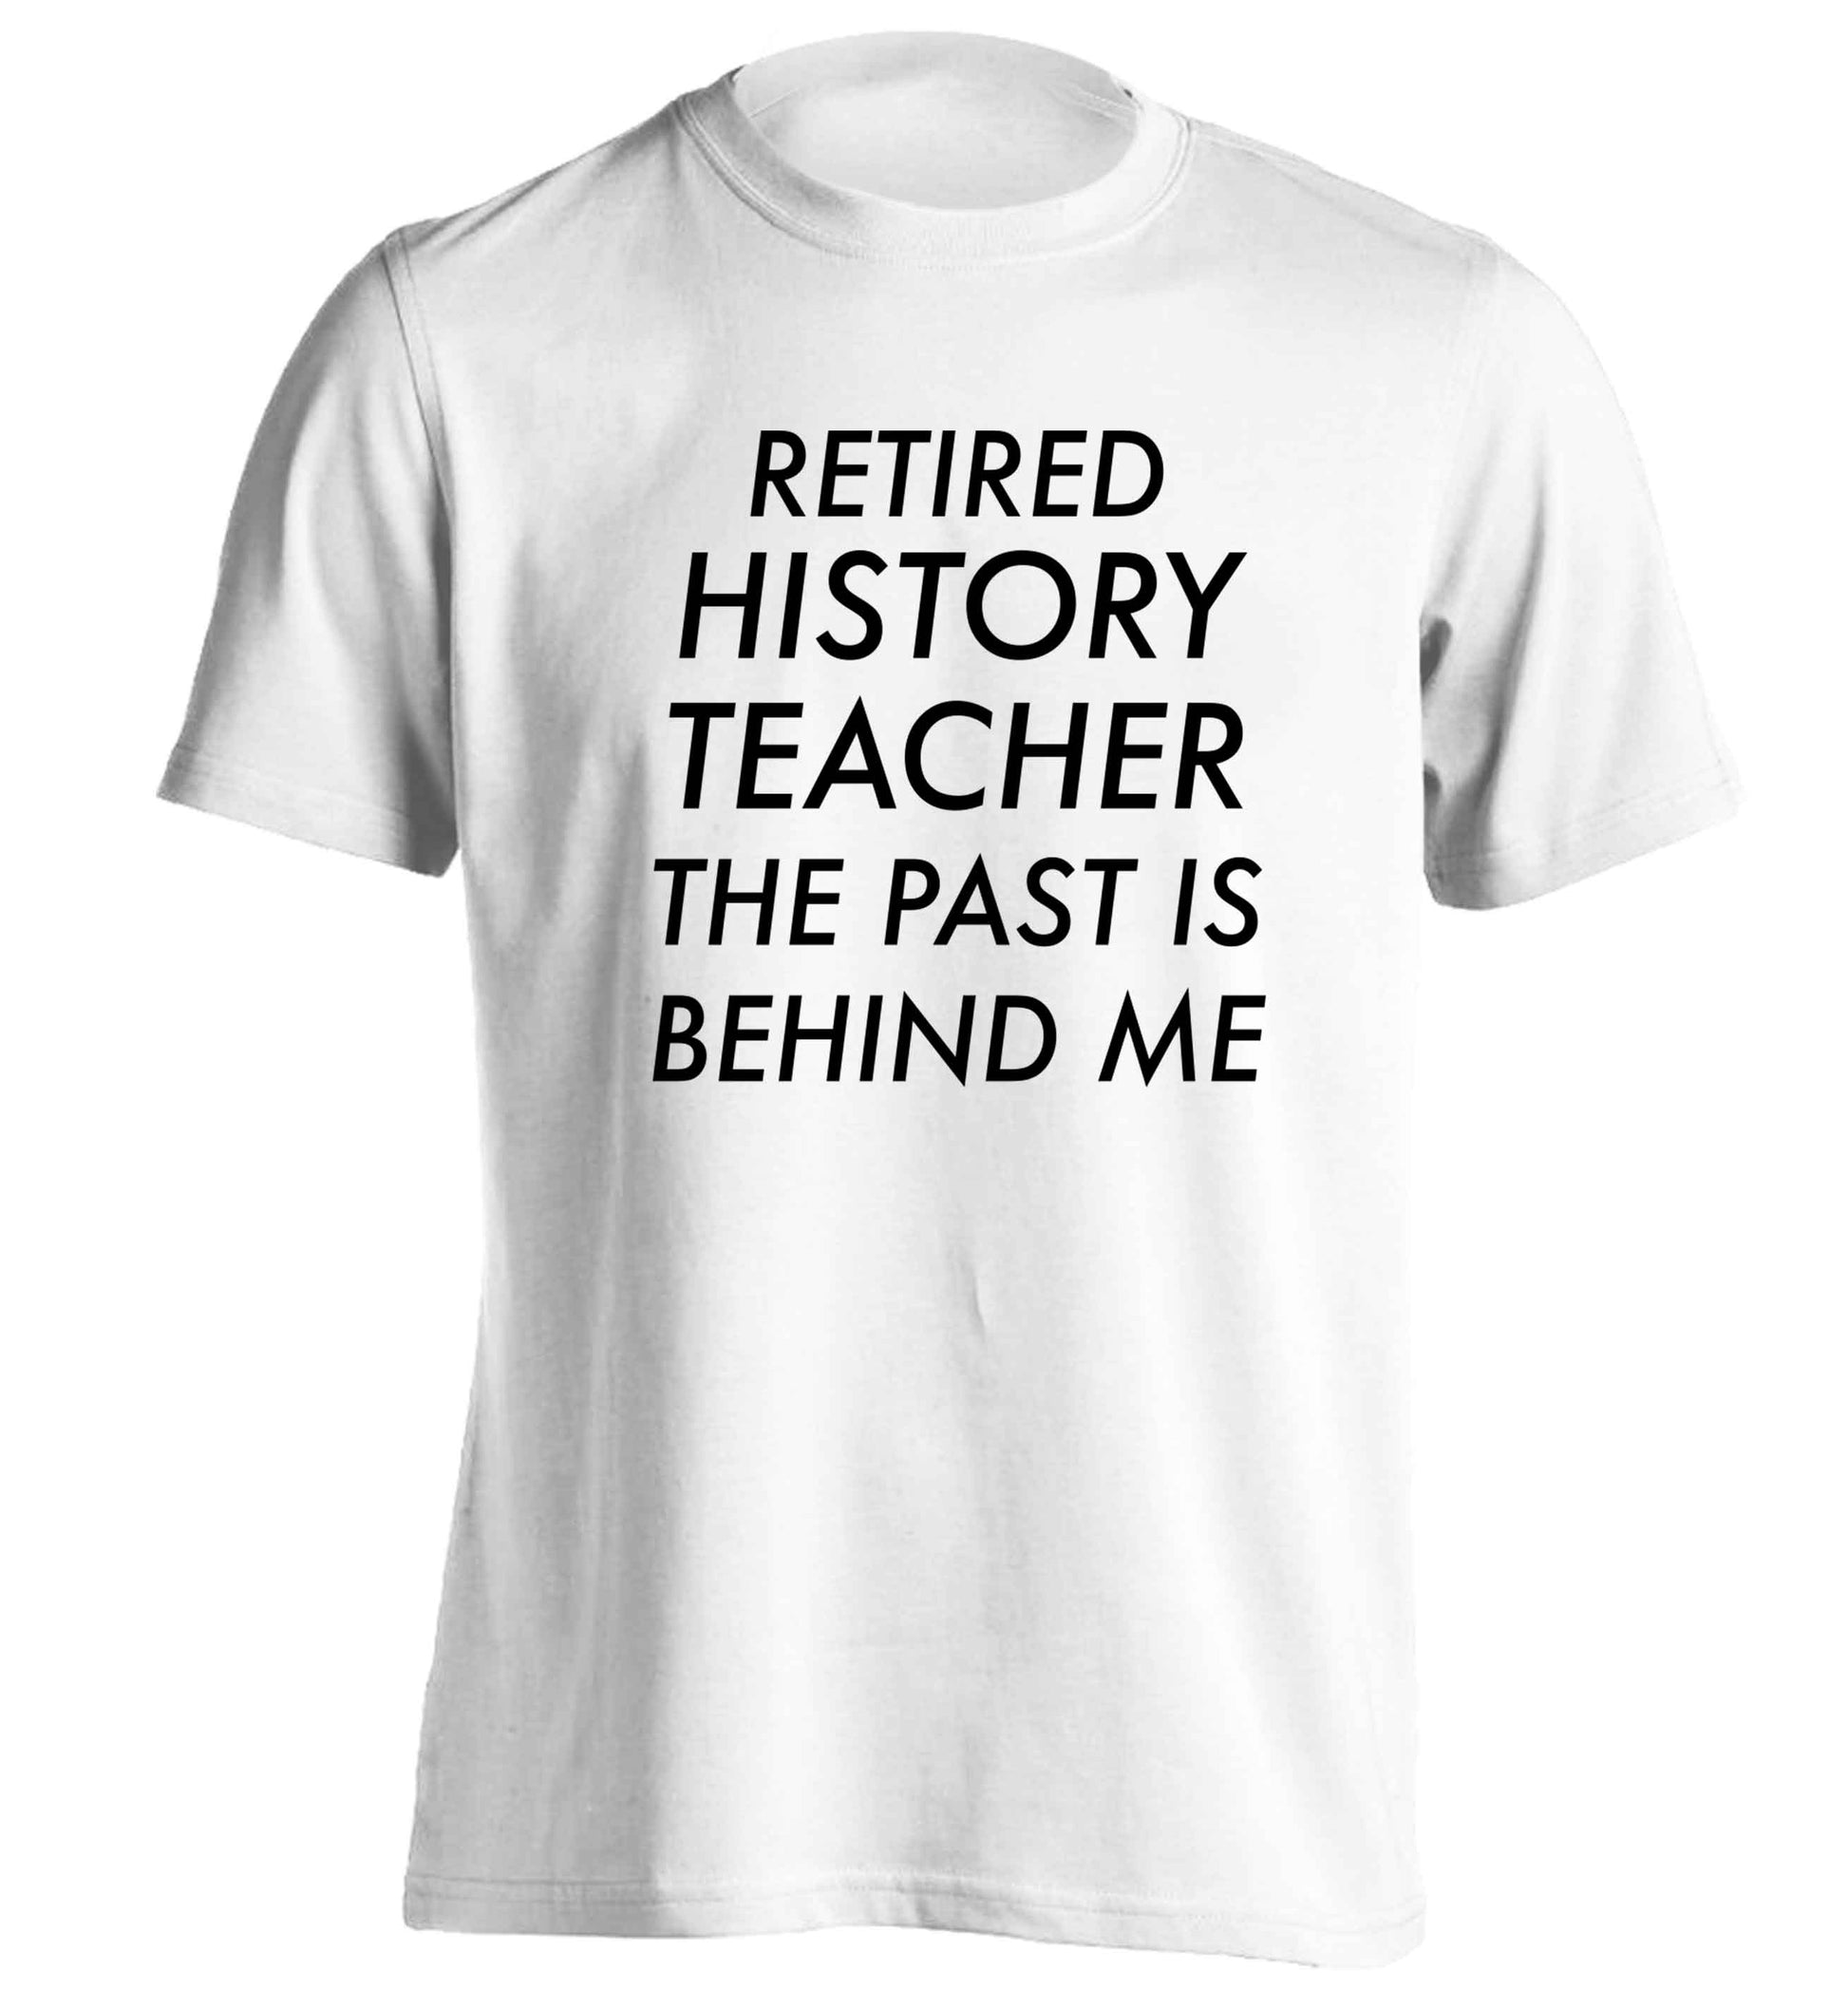 Retired history teacher the past is behind me adults unisex white Tshirt 2XL